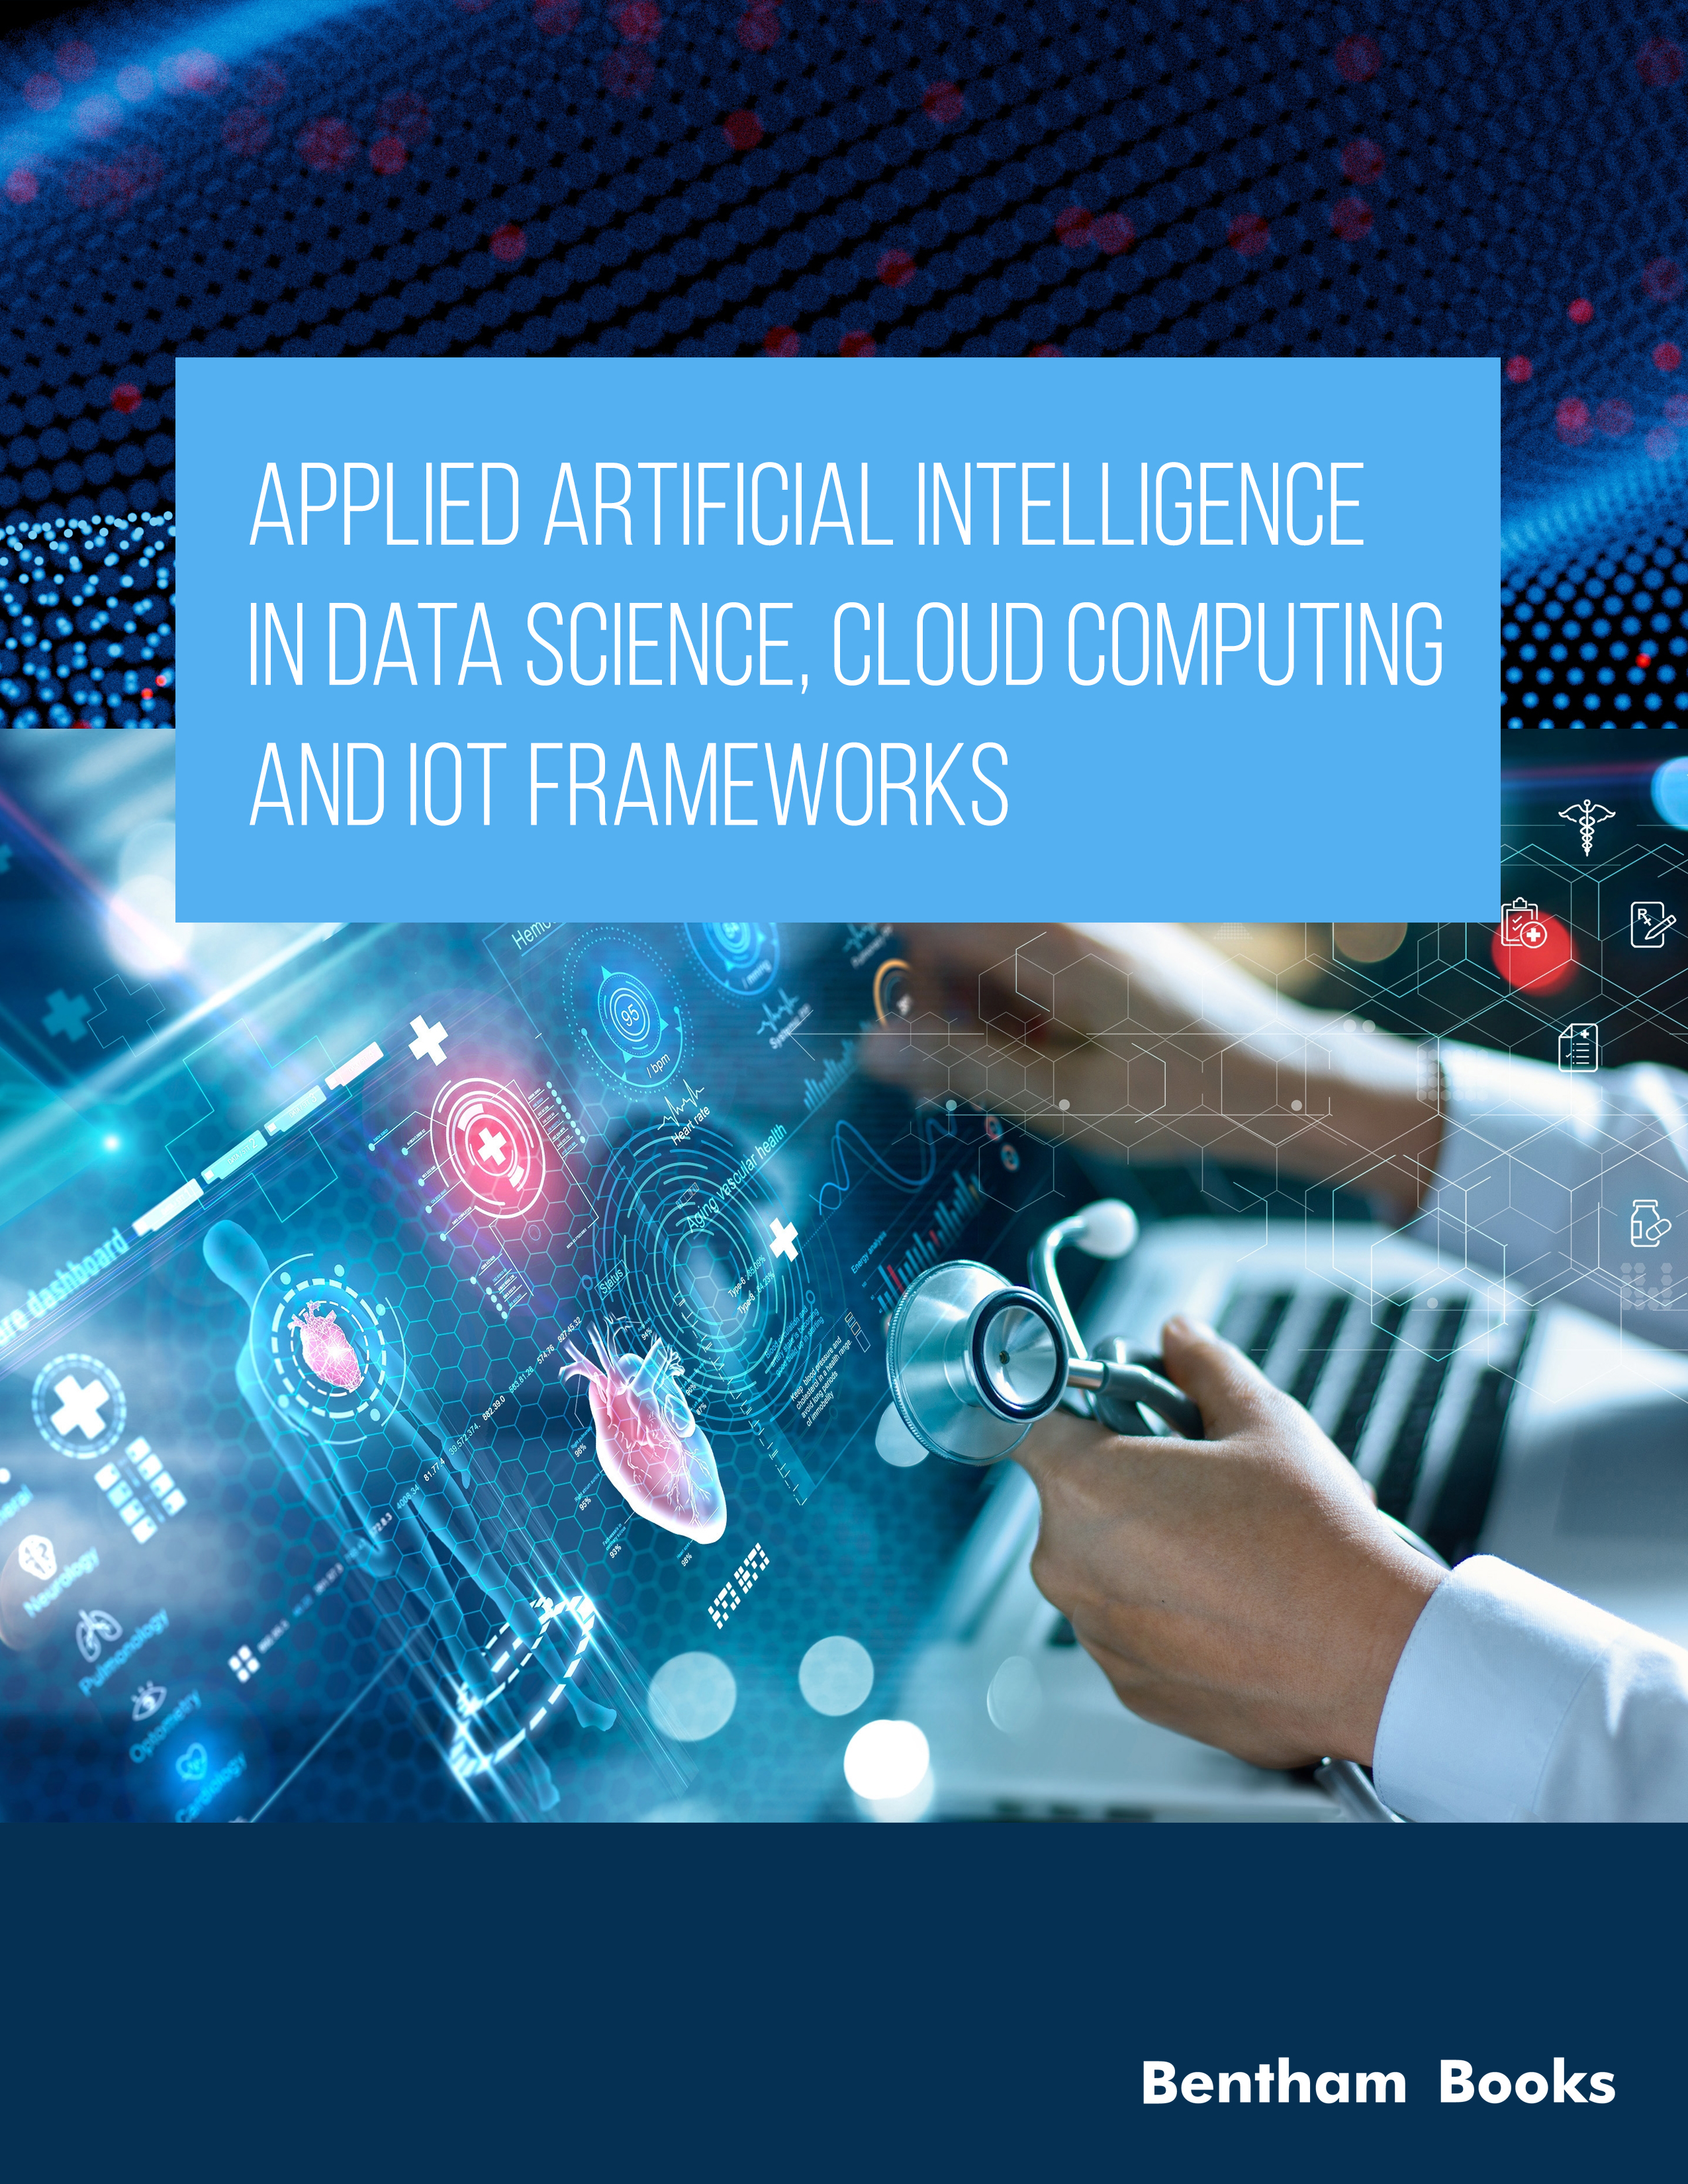 Applied Artificial Intelligence in Data Science, Cloud Computing and IoT Frameworks